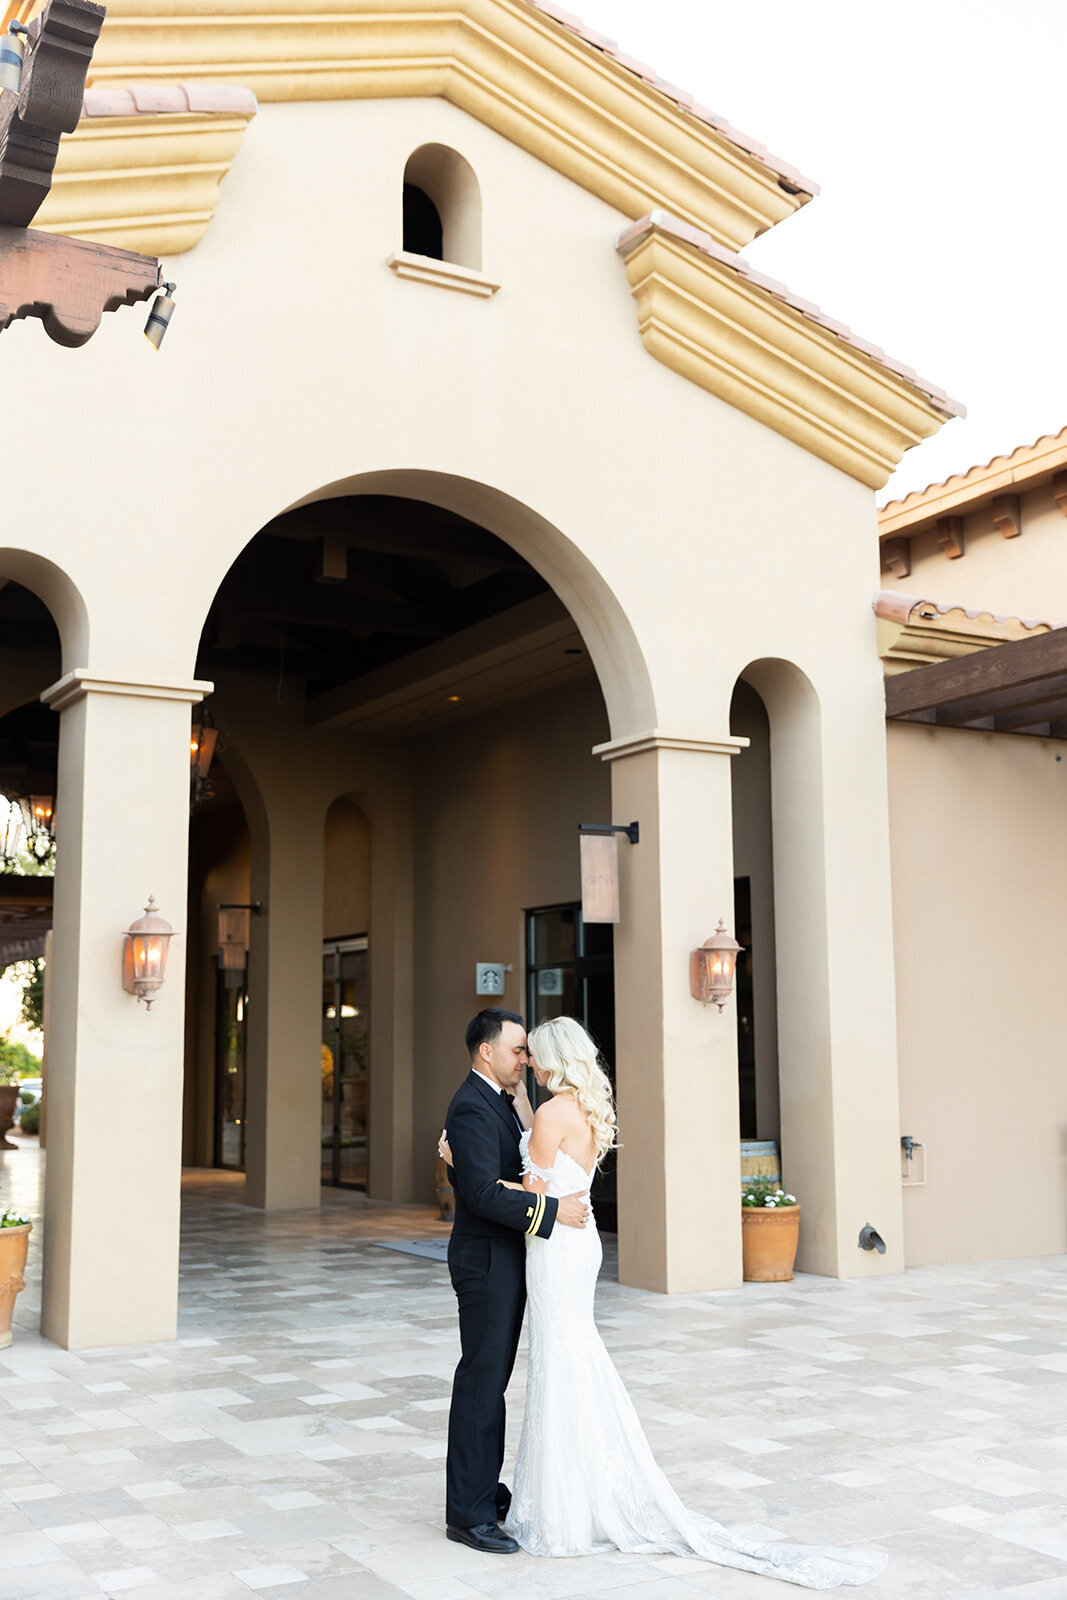 Karlie Colleen Photography - Holly & Ronnie Wedding - Seville Country Club - Gilbert Arizona-788